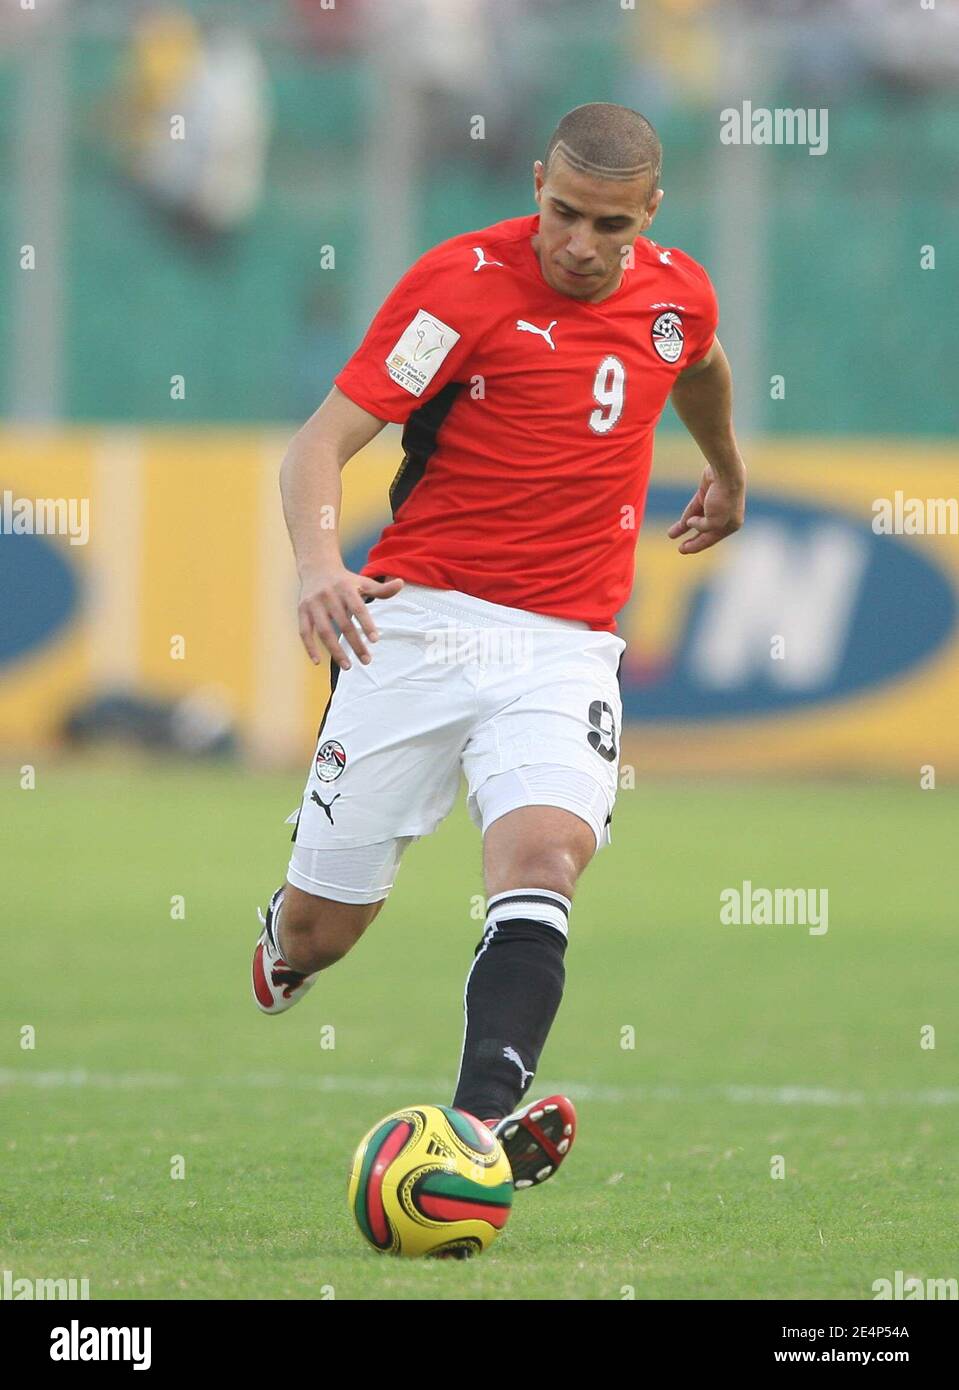 Egypt's Zidan Abdalla Mohamed during the African Cup of Nations soccer match, Cameroon vs Egypt, in Kumasi, Ghana on January 22, 2008. Egypt defeated Cameroon 4-1. Photo by Steeve McMay/Cameleon/ABACAPRESS.COM Stock Photo